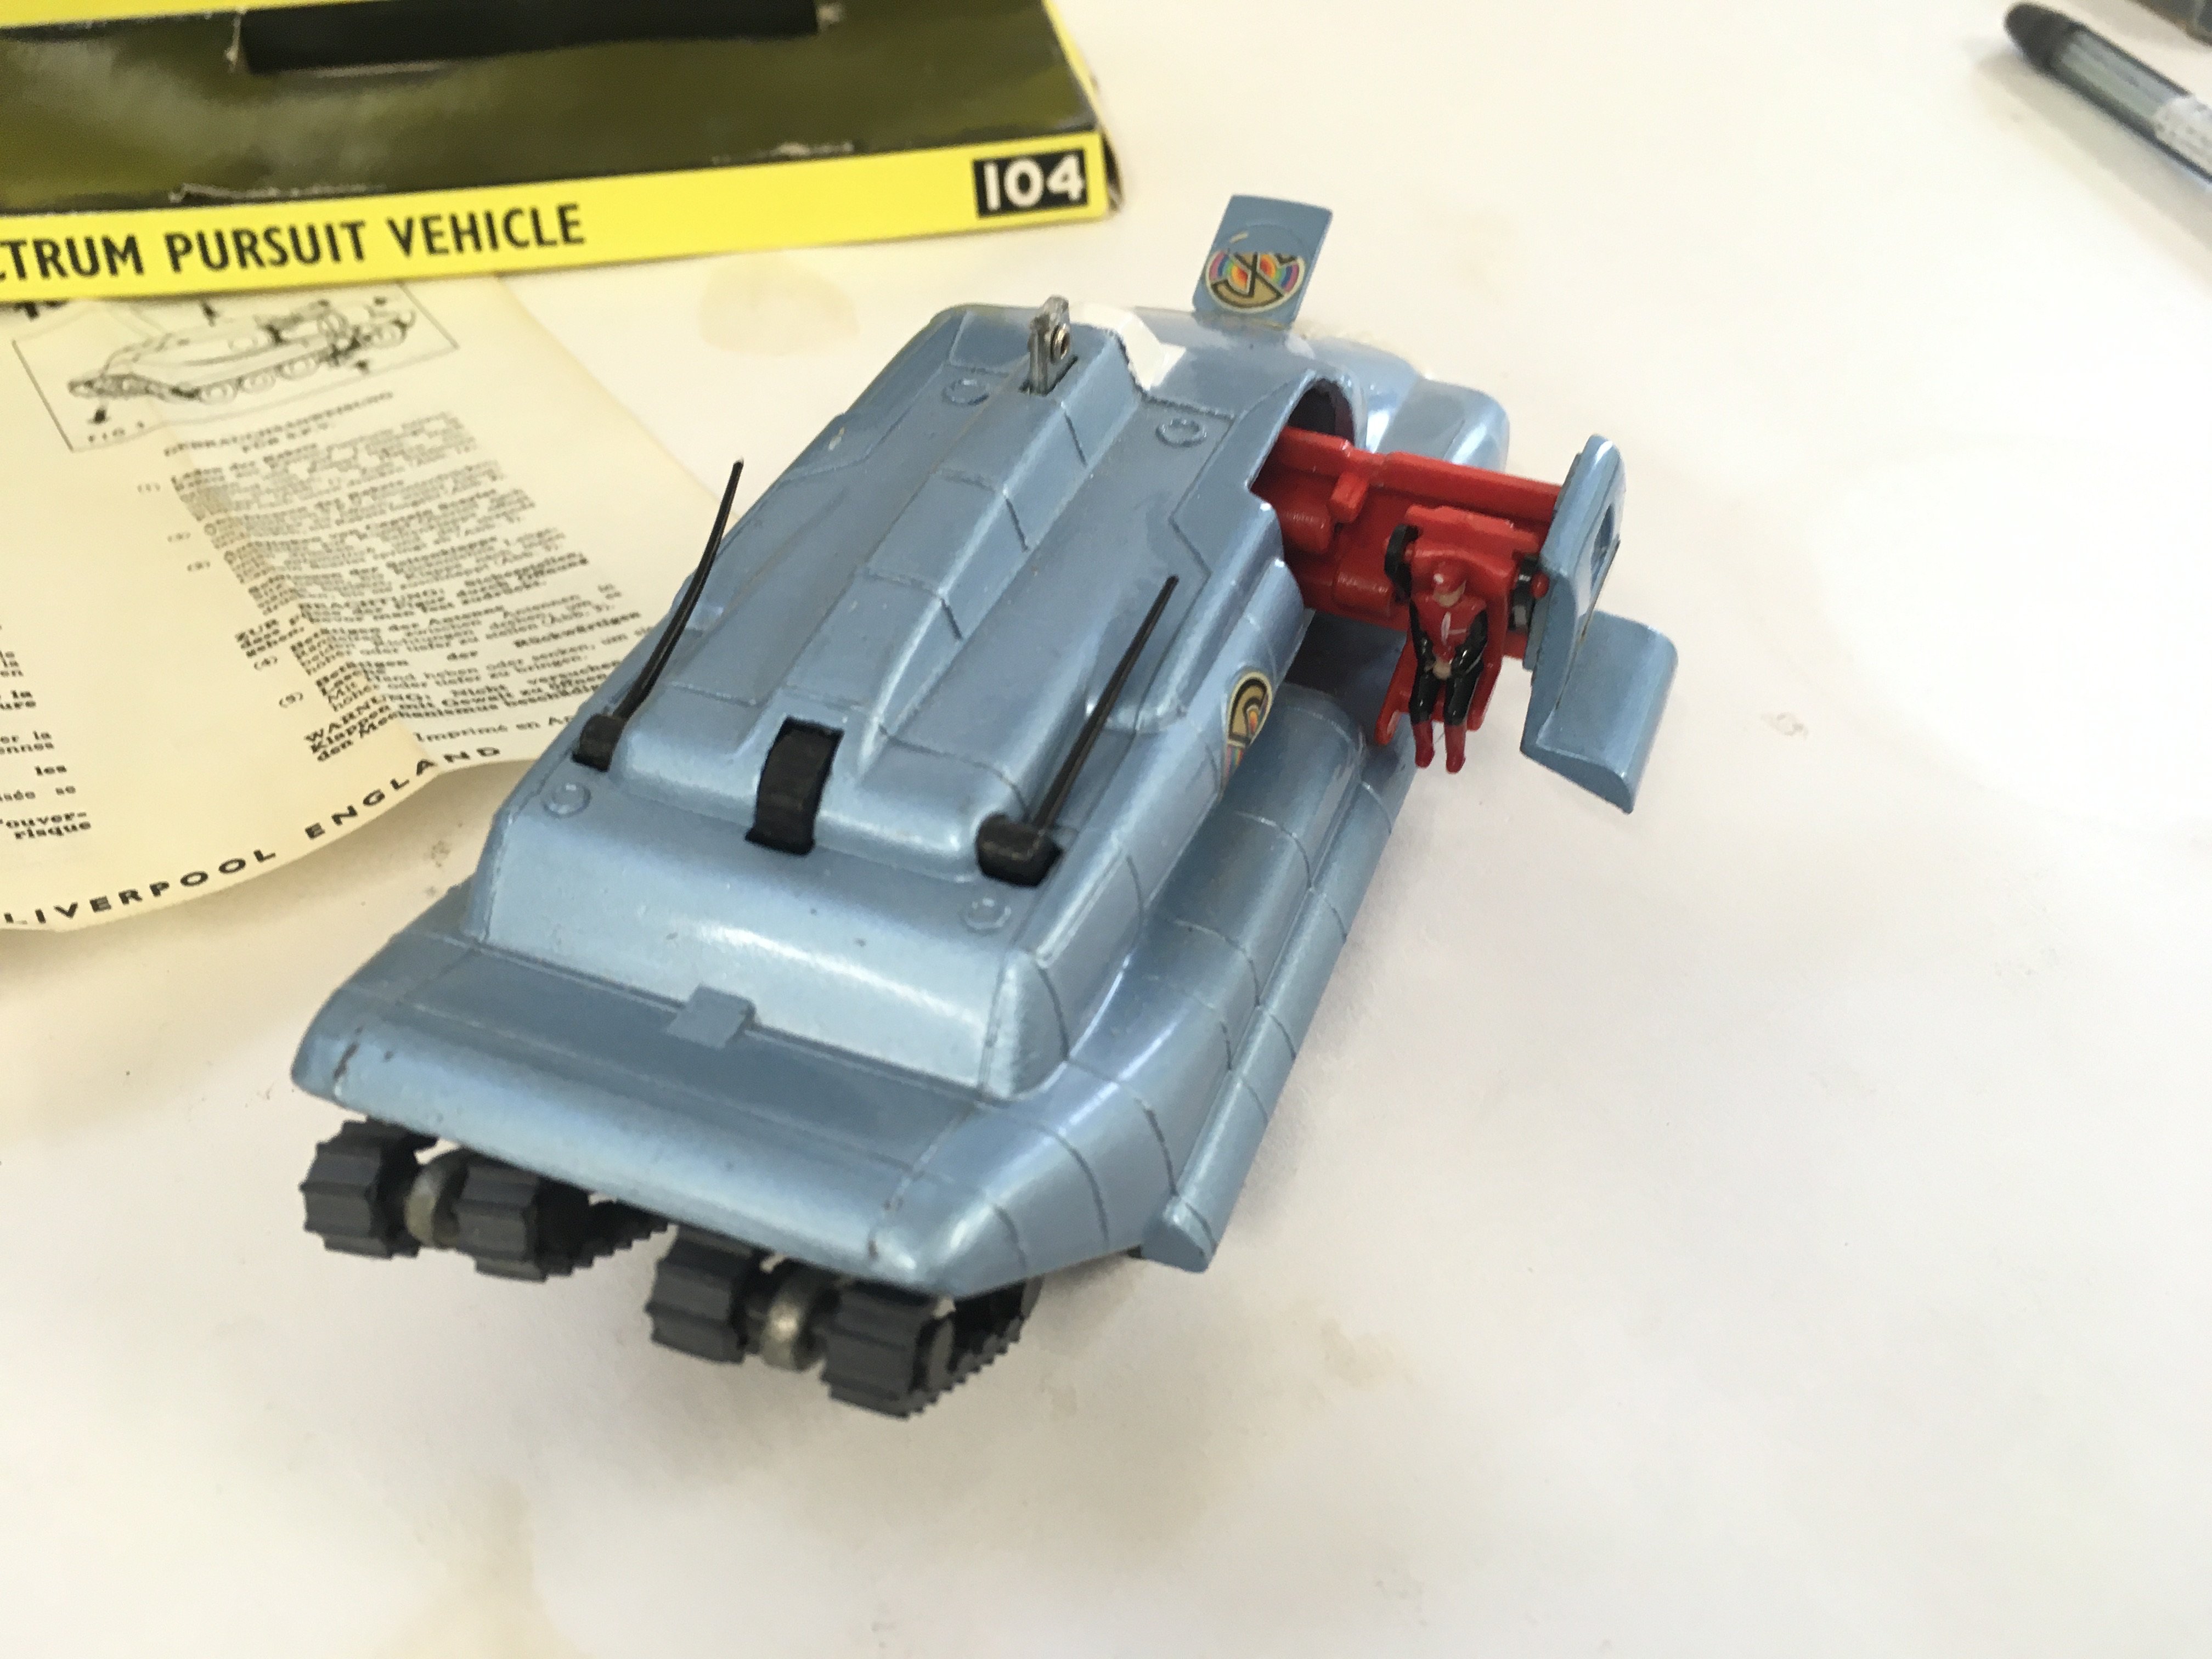 In original box a Dinky Spectrum Pursuit Vehicle. - Image 3 of 5